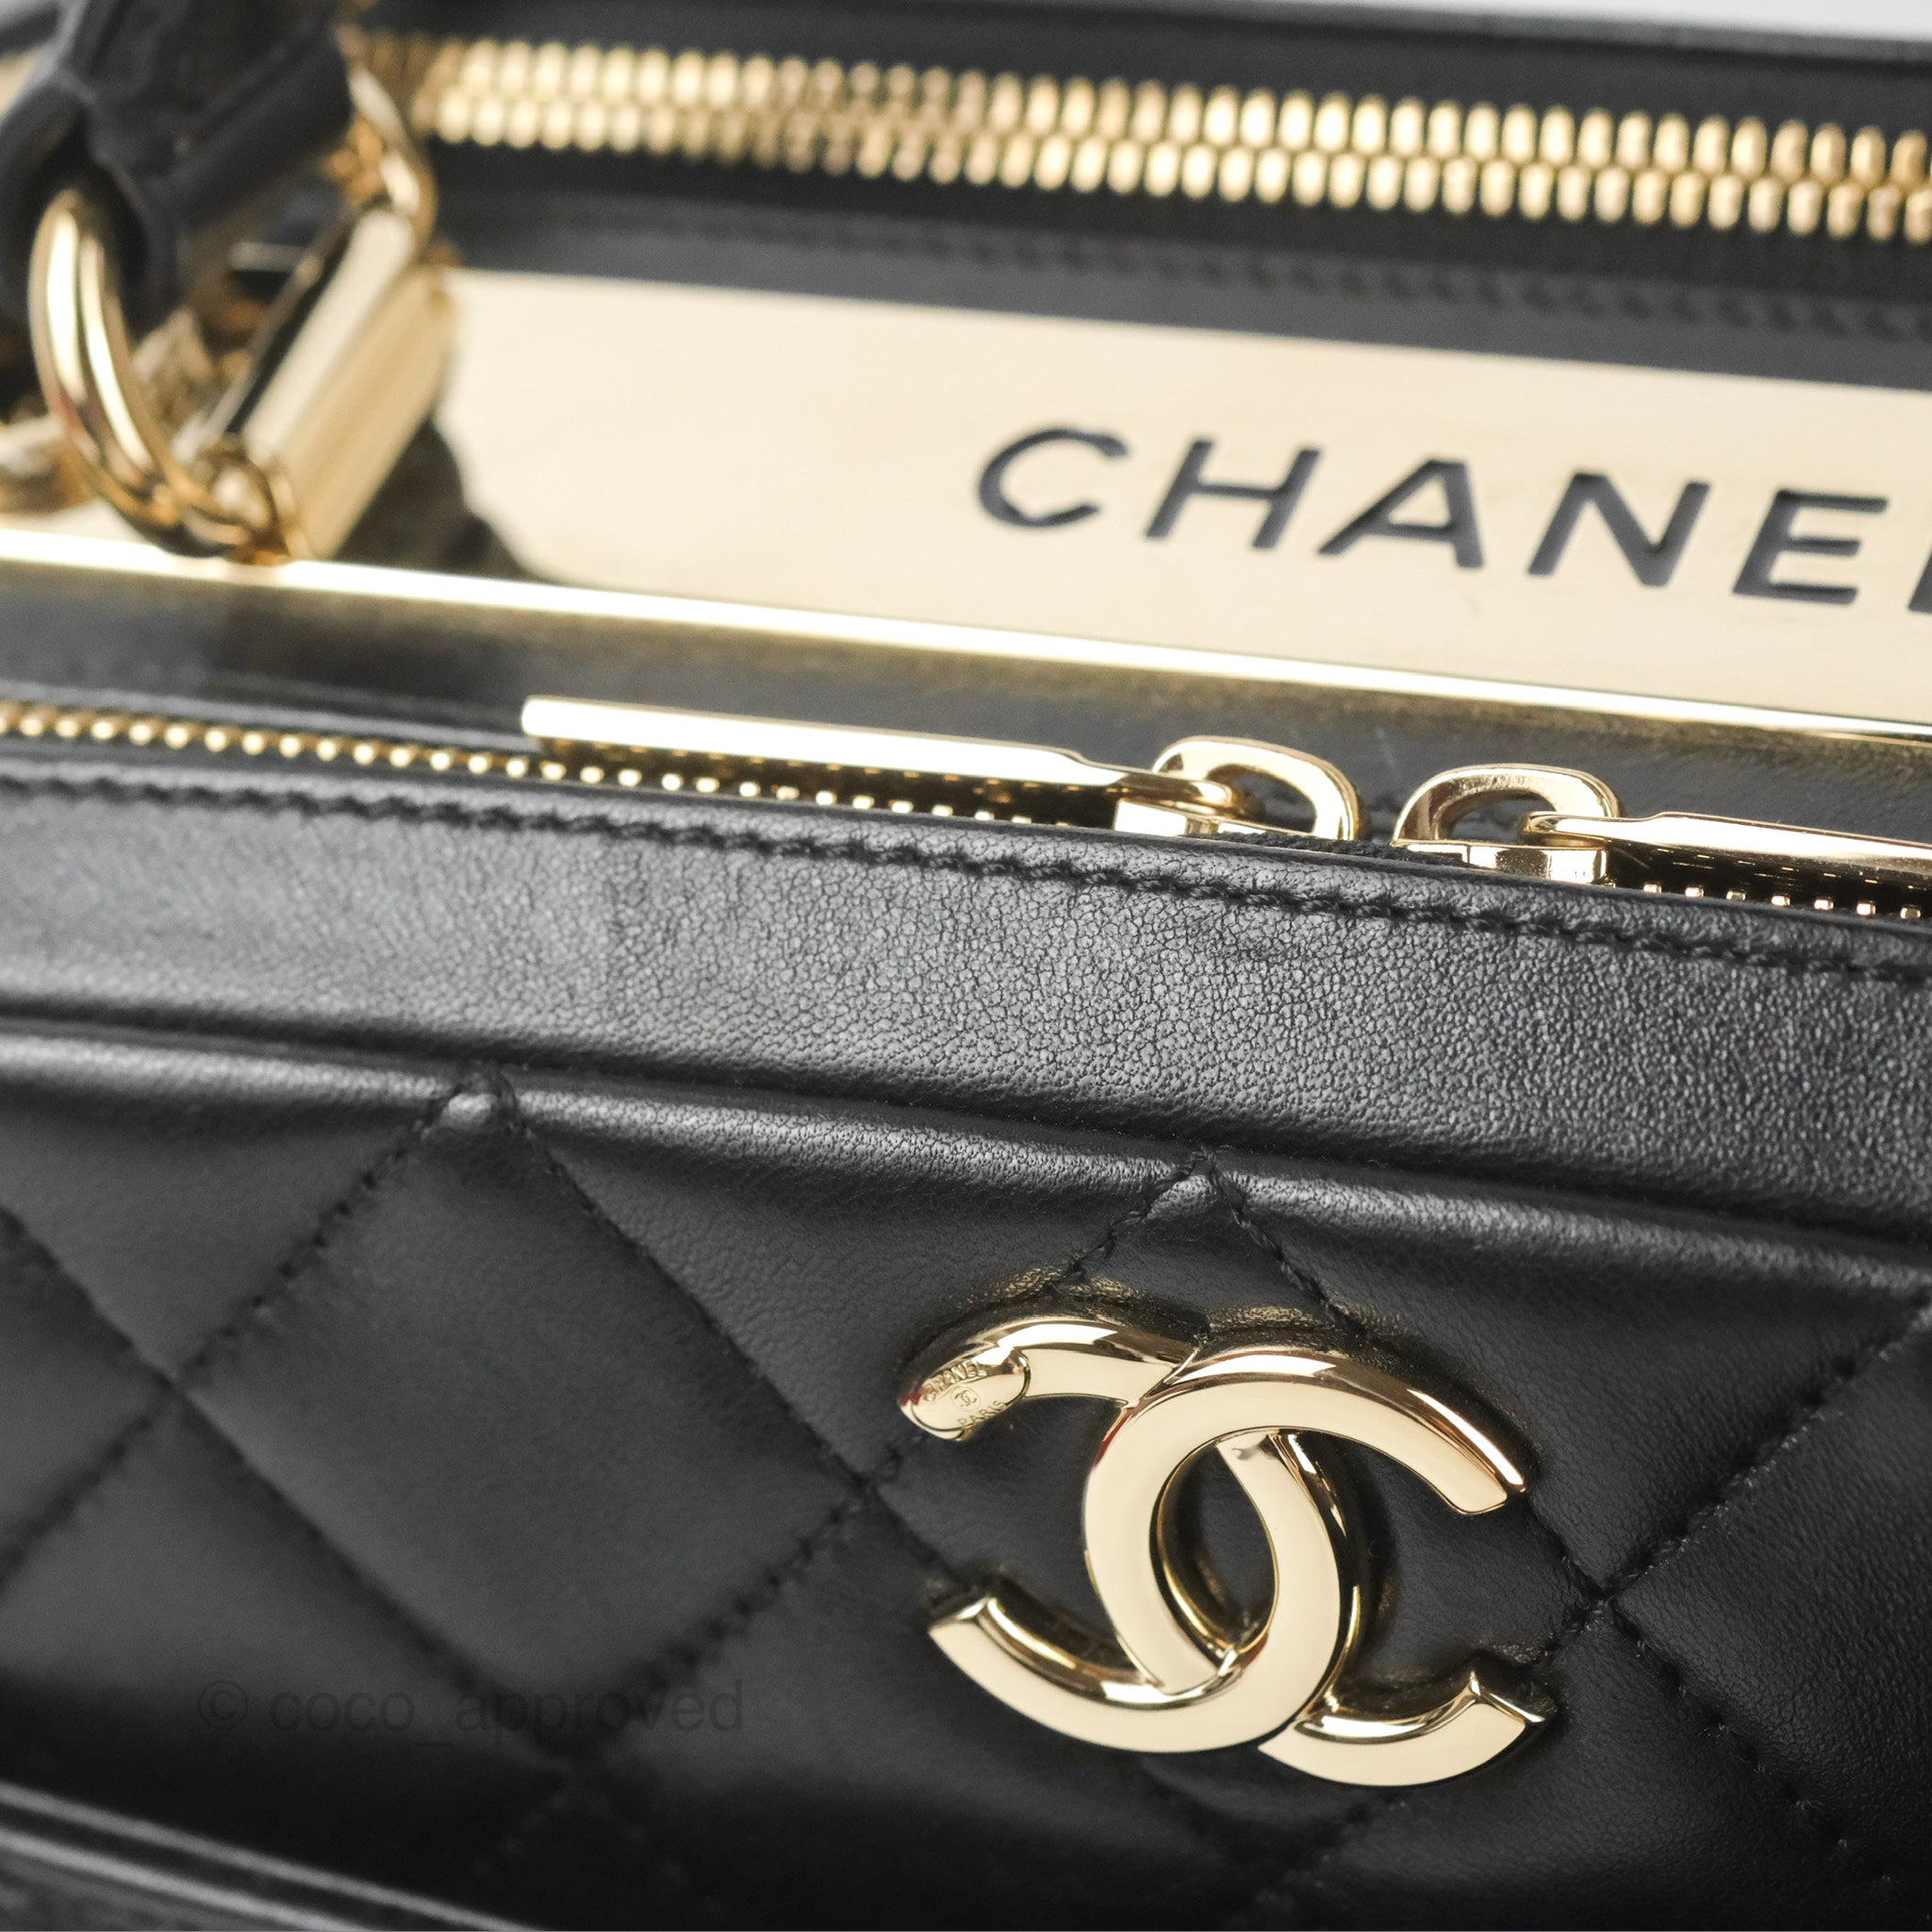 Chanel Camera Bag Quilted Lambskin Small Trendy Cc Bowling 2way